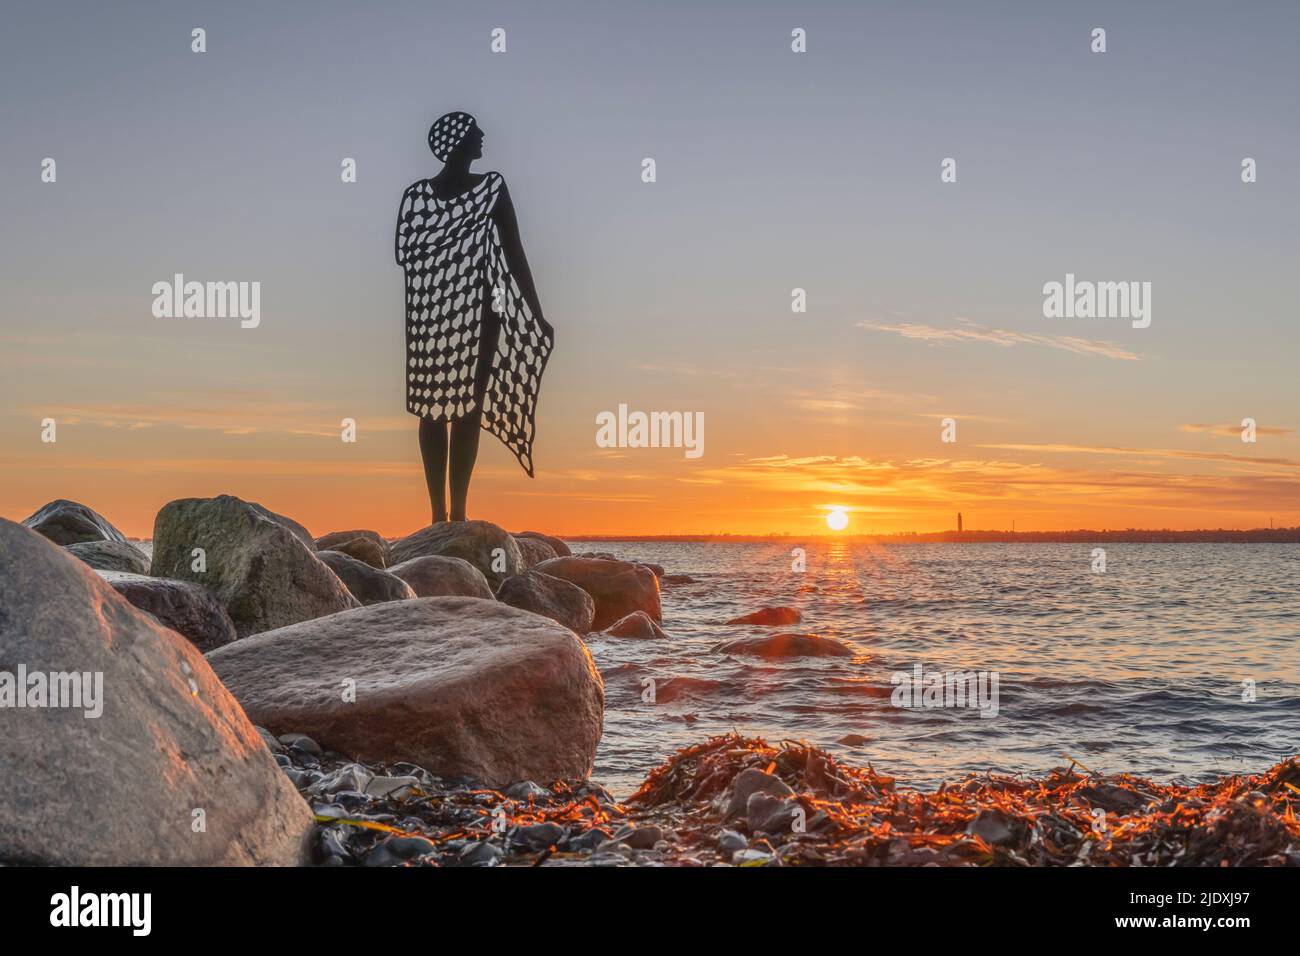 Germany, Schleswig-Holstein, Strande, After Bath statue at sunset Stock Photo